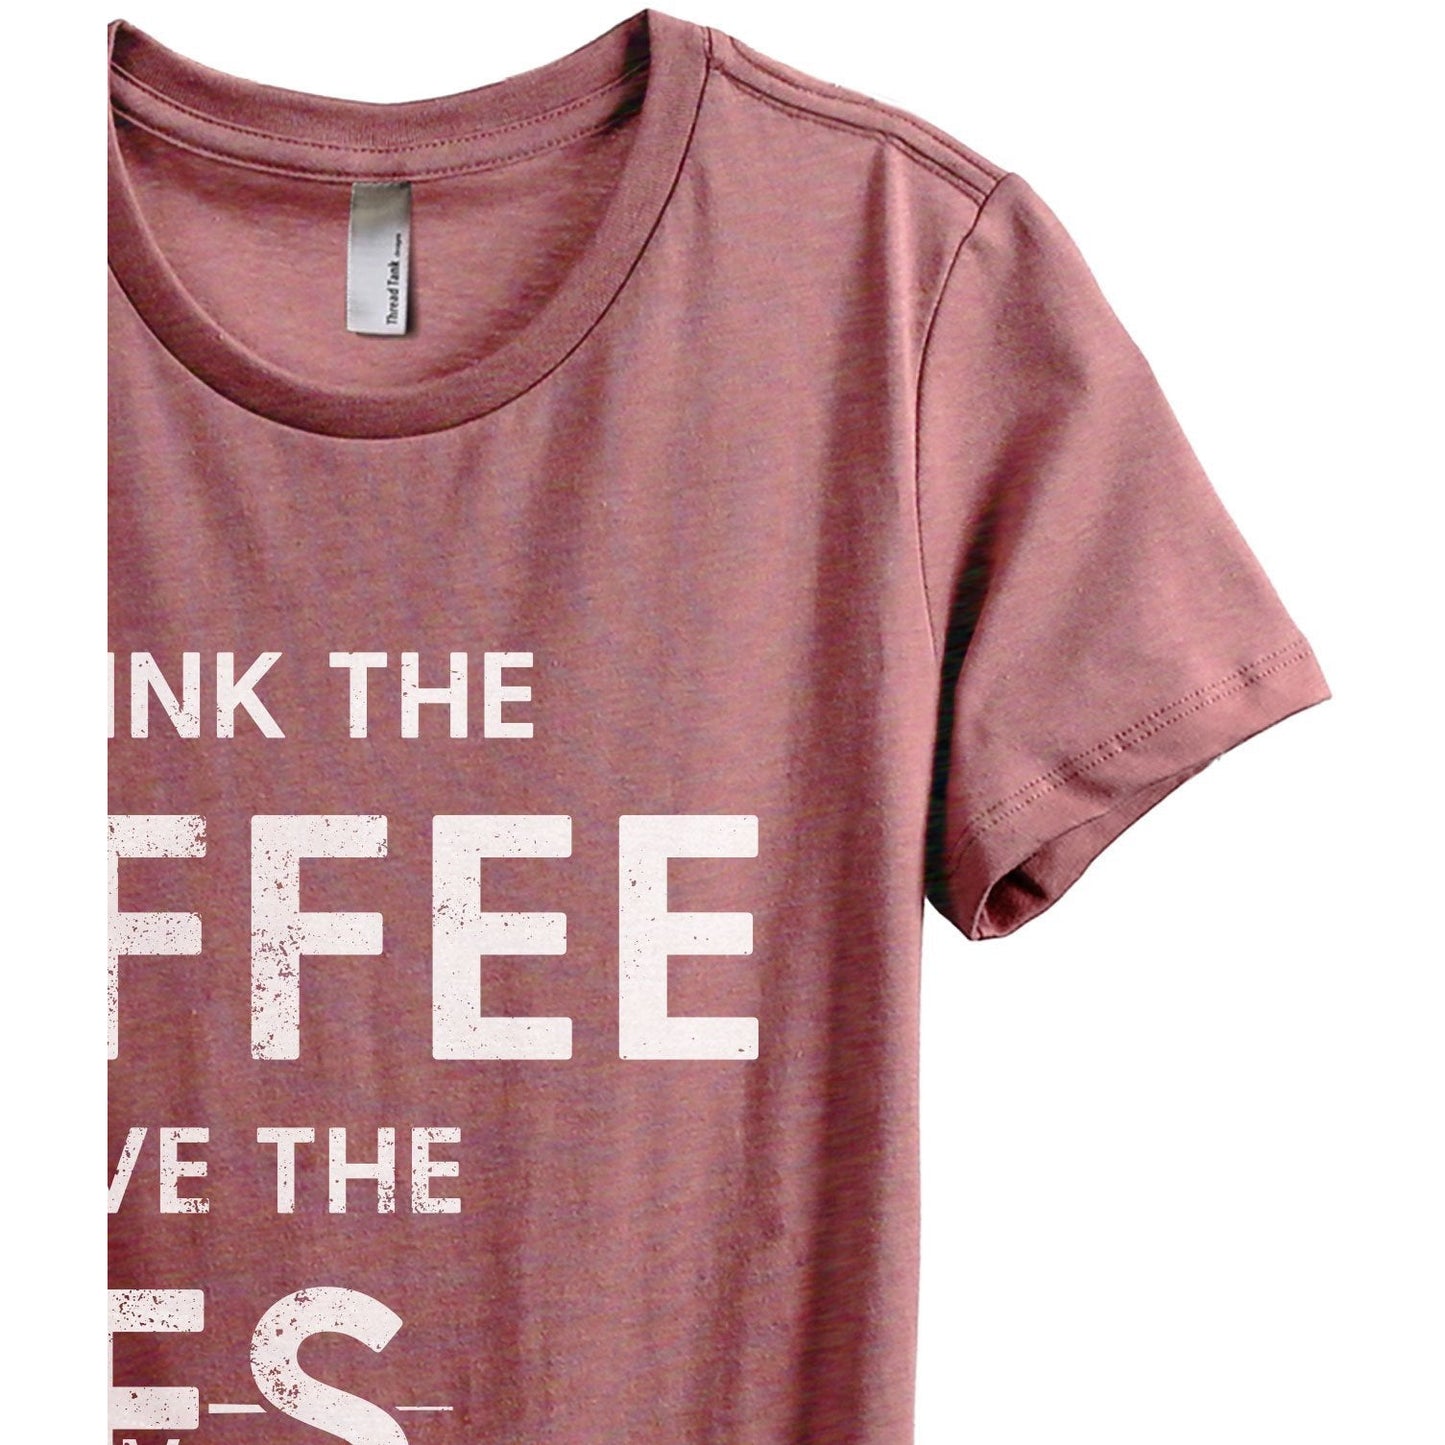 First I Drink The Coffee Then I Save The Lives Women's Relaxed Crewneck T-Shirt Top Tee Heather Rouge Zoom Details
